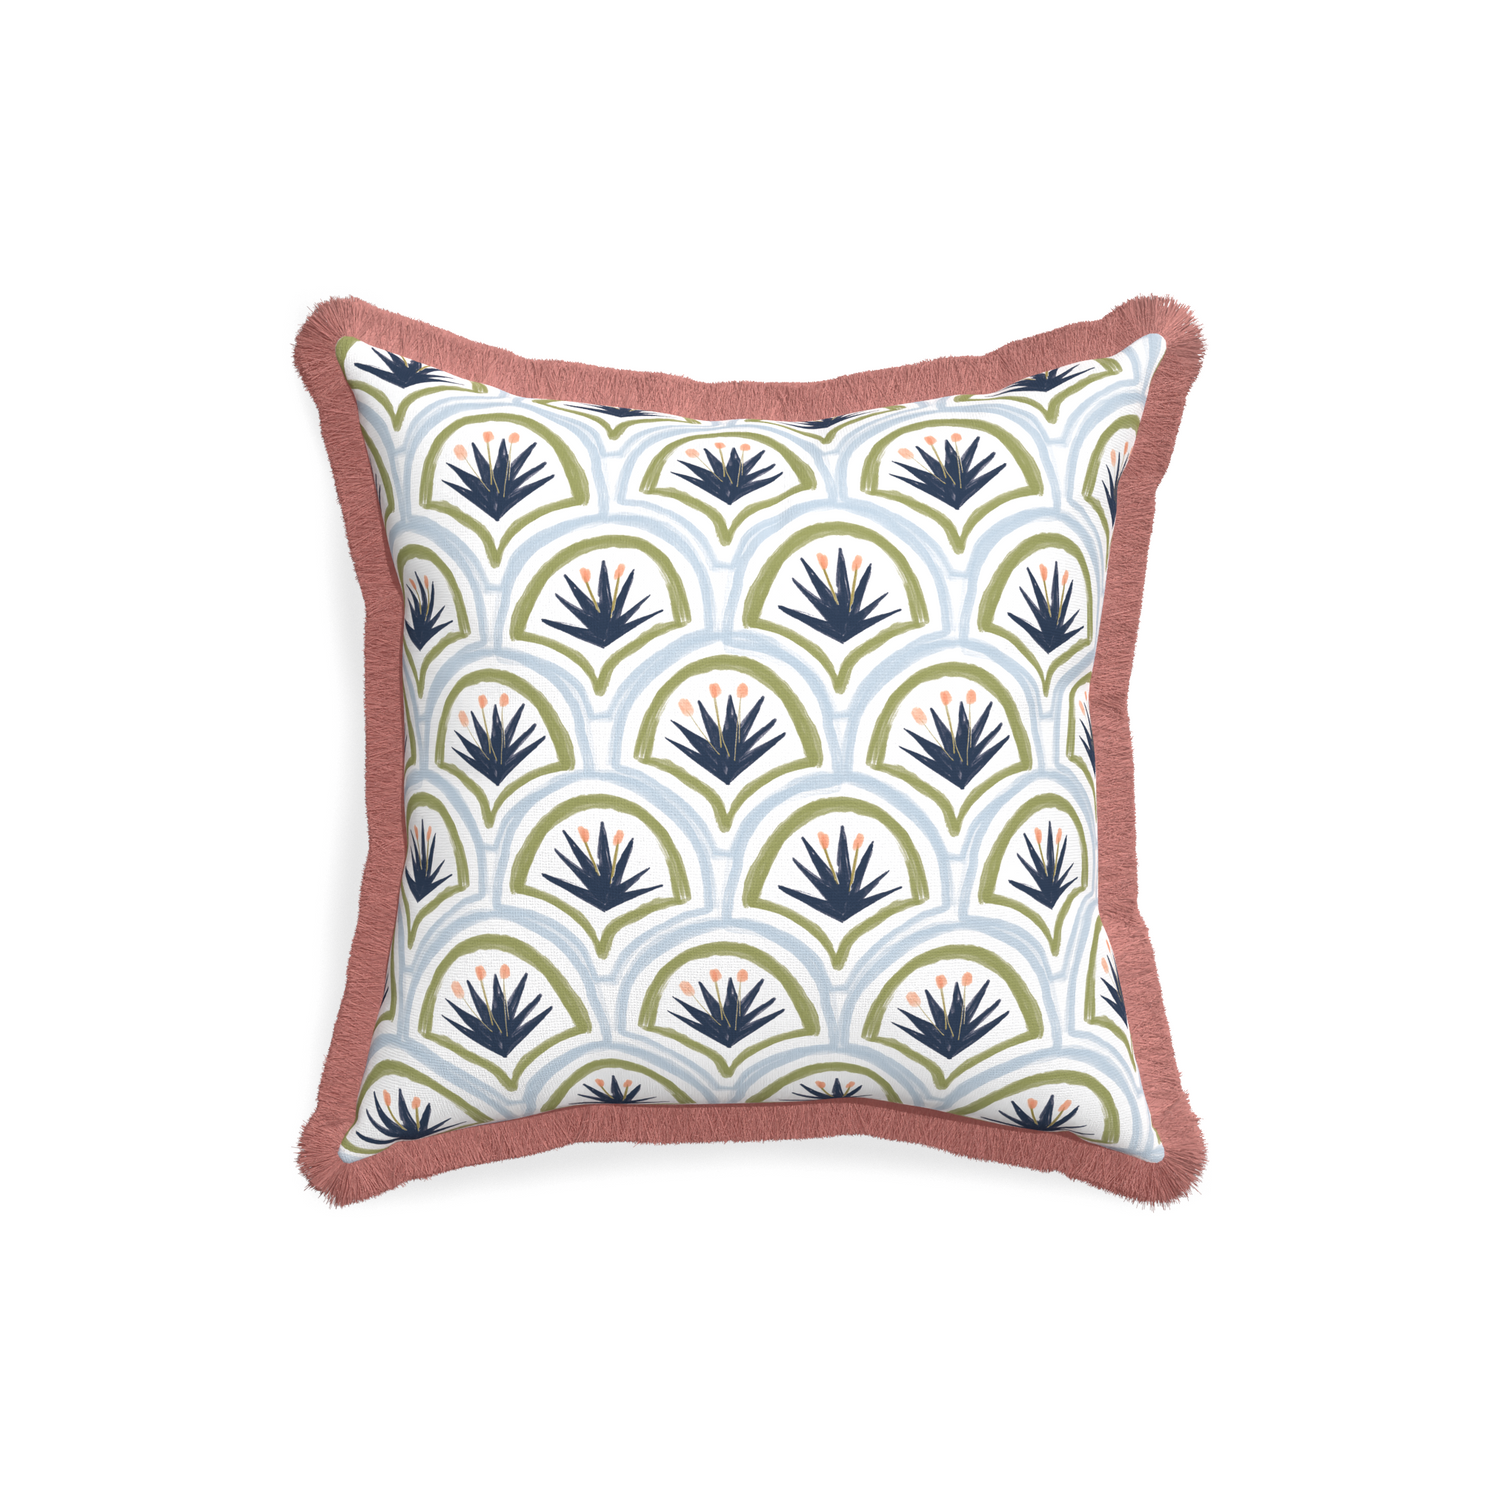 18-square thatcher midnight custom art deco palm patternpillow with d fringe on white background